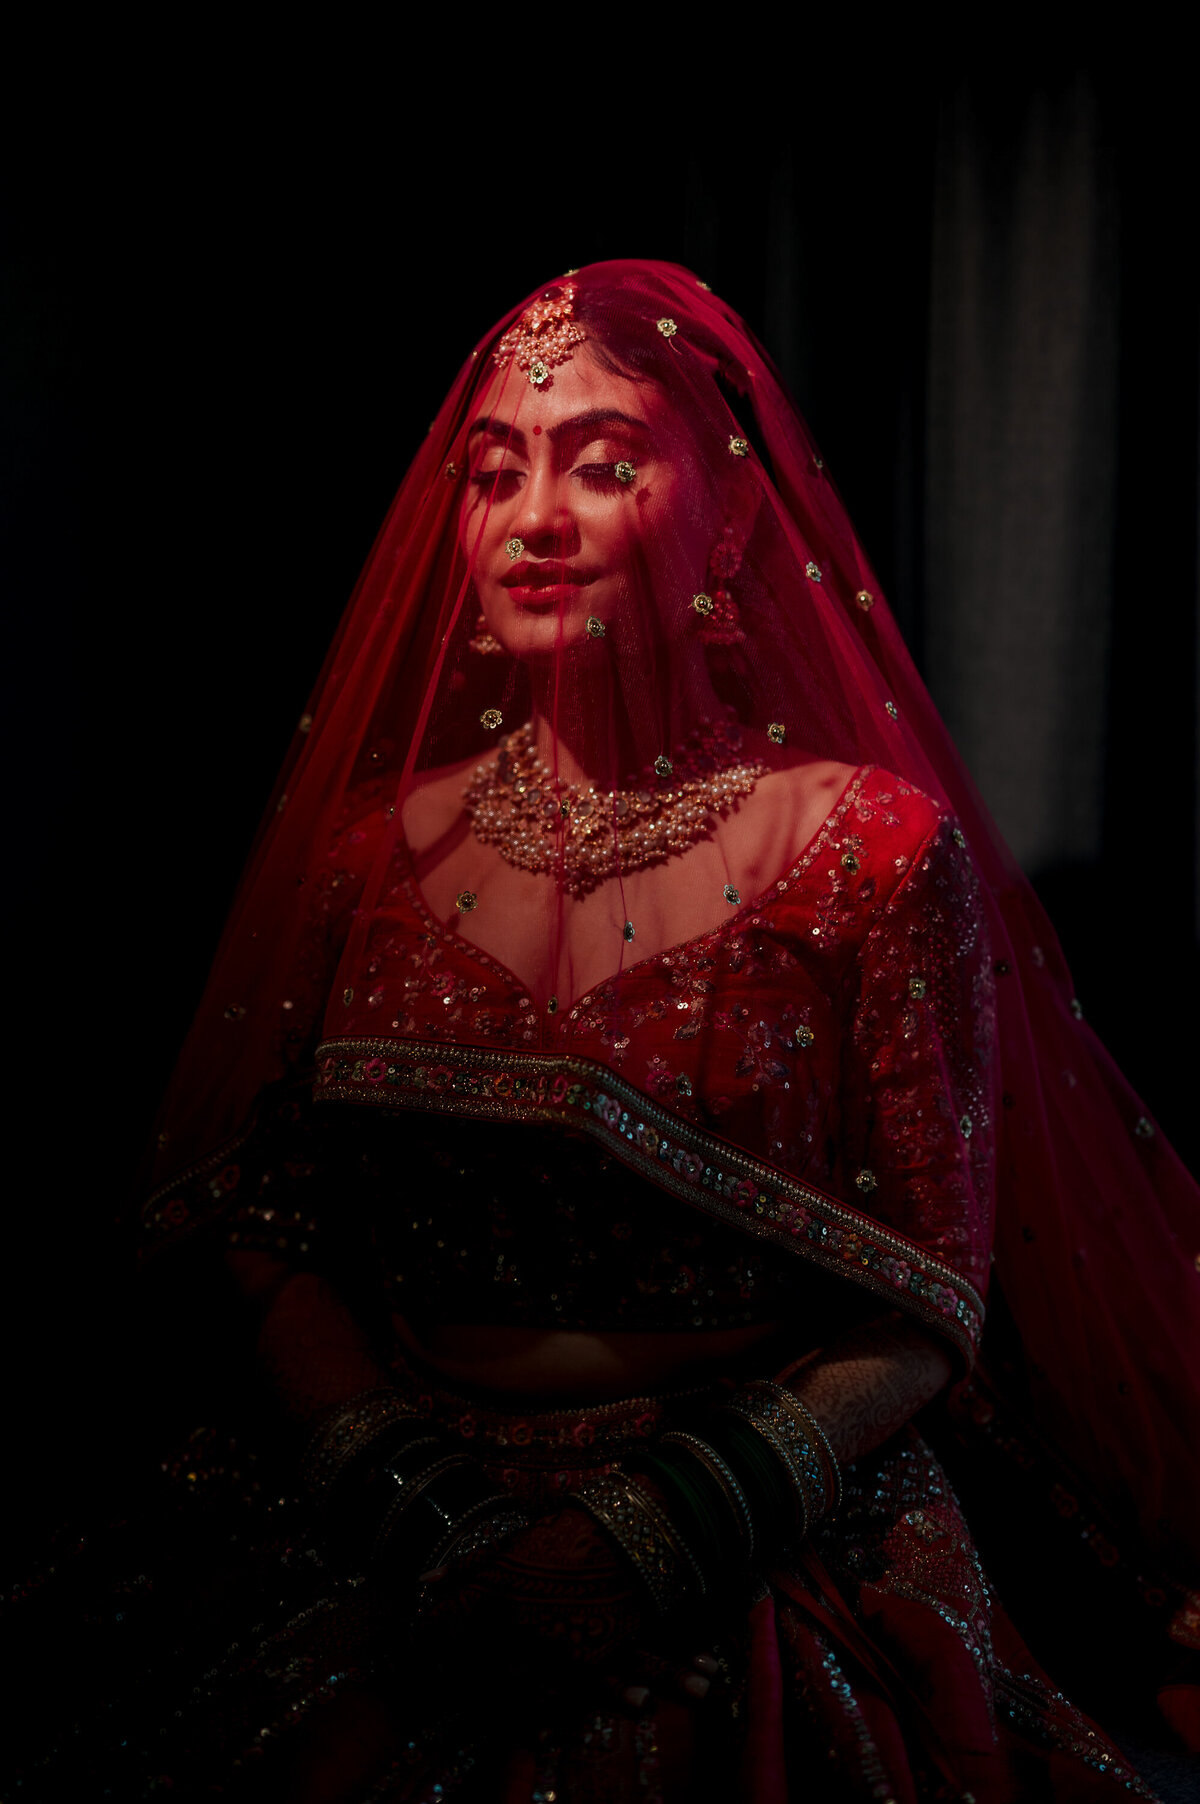 Ishan Fotografi is a premiere wedding photography studio celebrating authentic Indian wedding traditions.